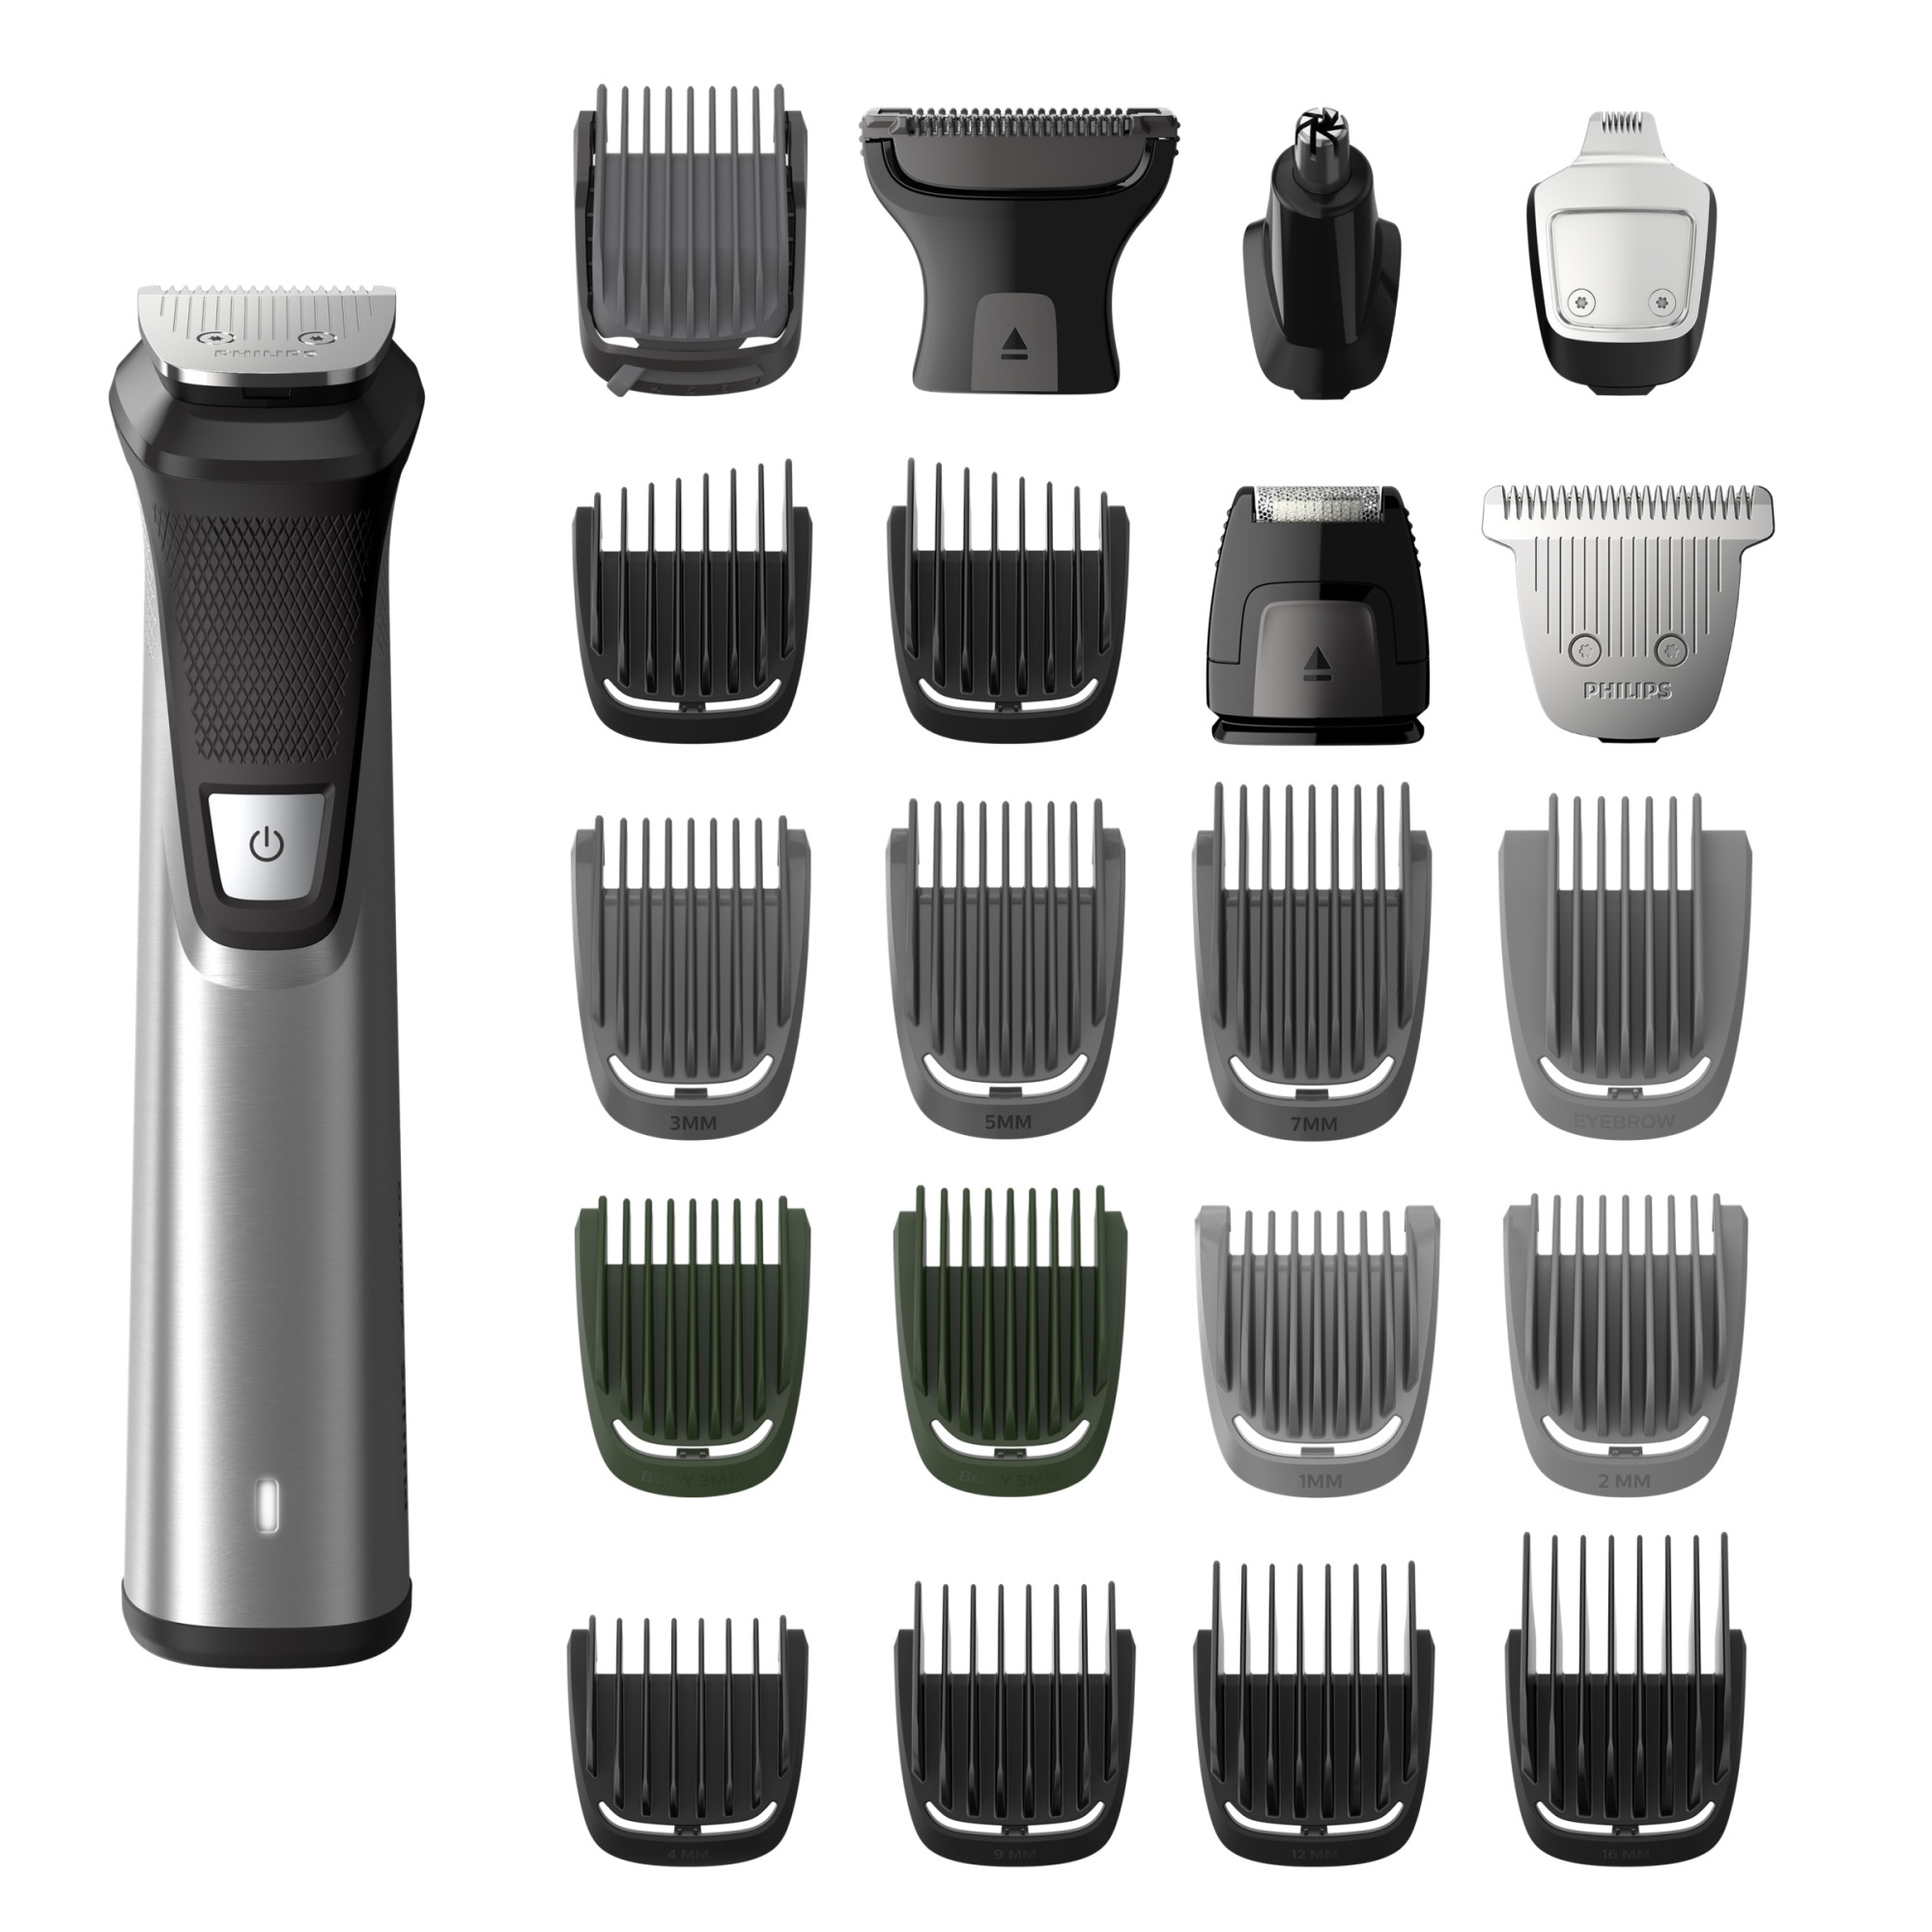 Philips Norelco Multi Groomer - 25 Piece Mens Grooming Kit For Beard, Body, Face, Nose, and Ear Hair Trimmer, Shaver, and Clipper W/ Premium Storage Case - No Blade Oil Needed, MG7770/49 - image 1 of 23